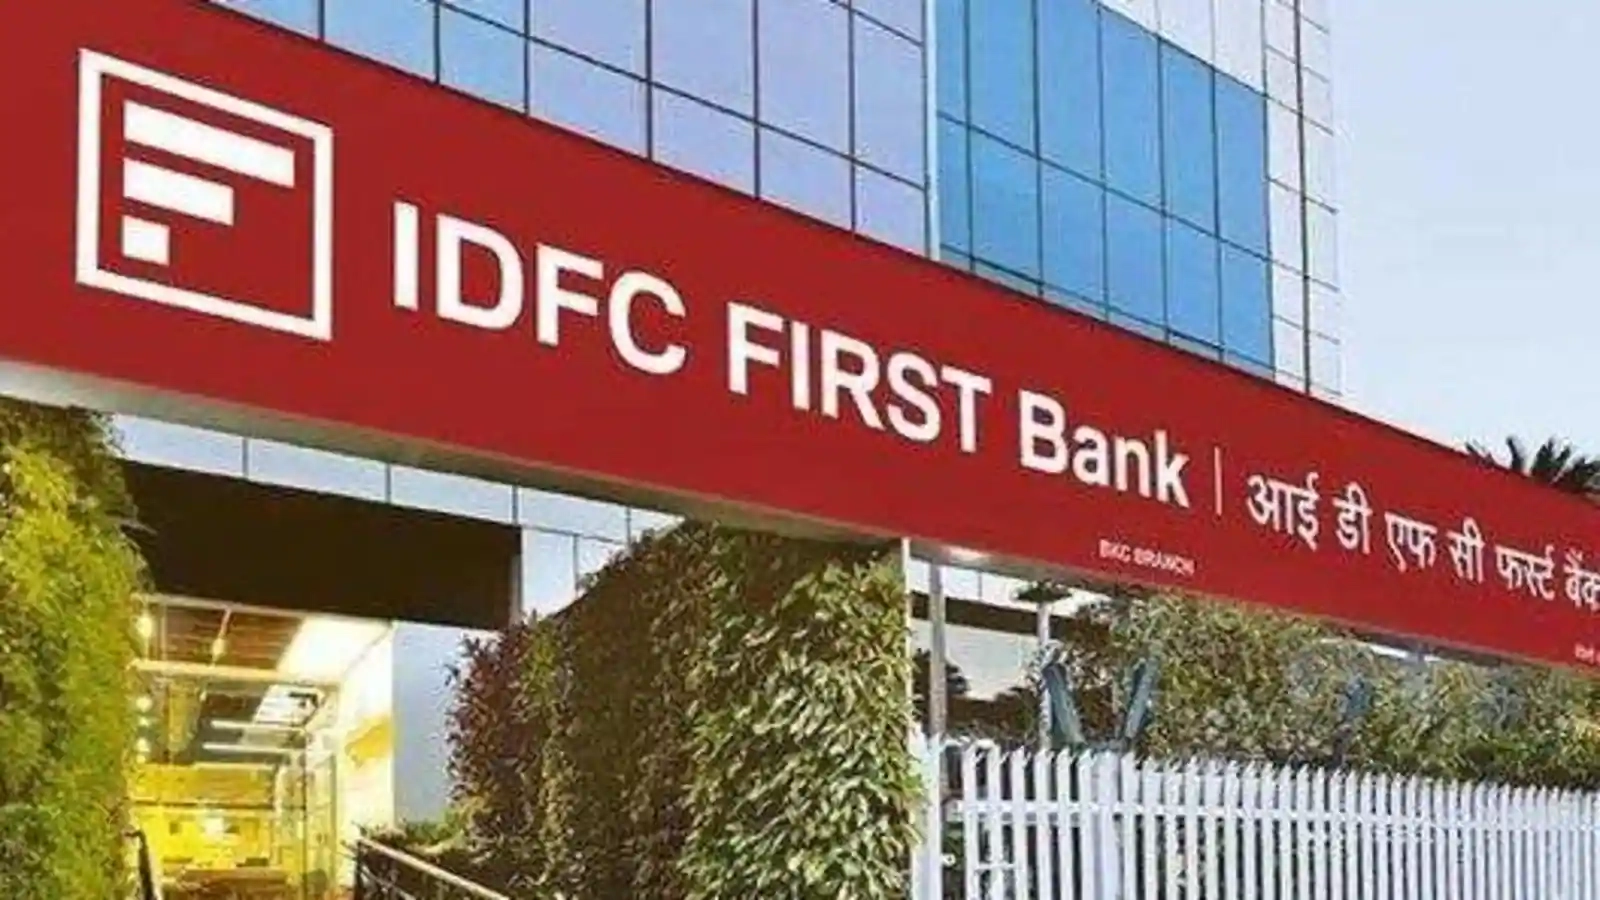 According to IDFC Bank, the proposed amalgamation is expected to bring several benefits, including growth prospects, unlocking shareholder value, compliance facilitation, simplification of corporate structures, and a larger public float.